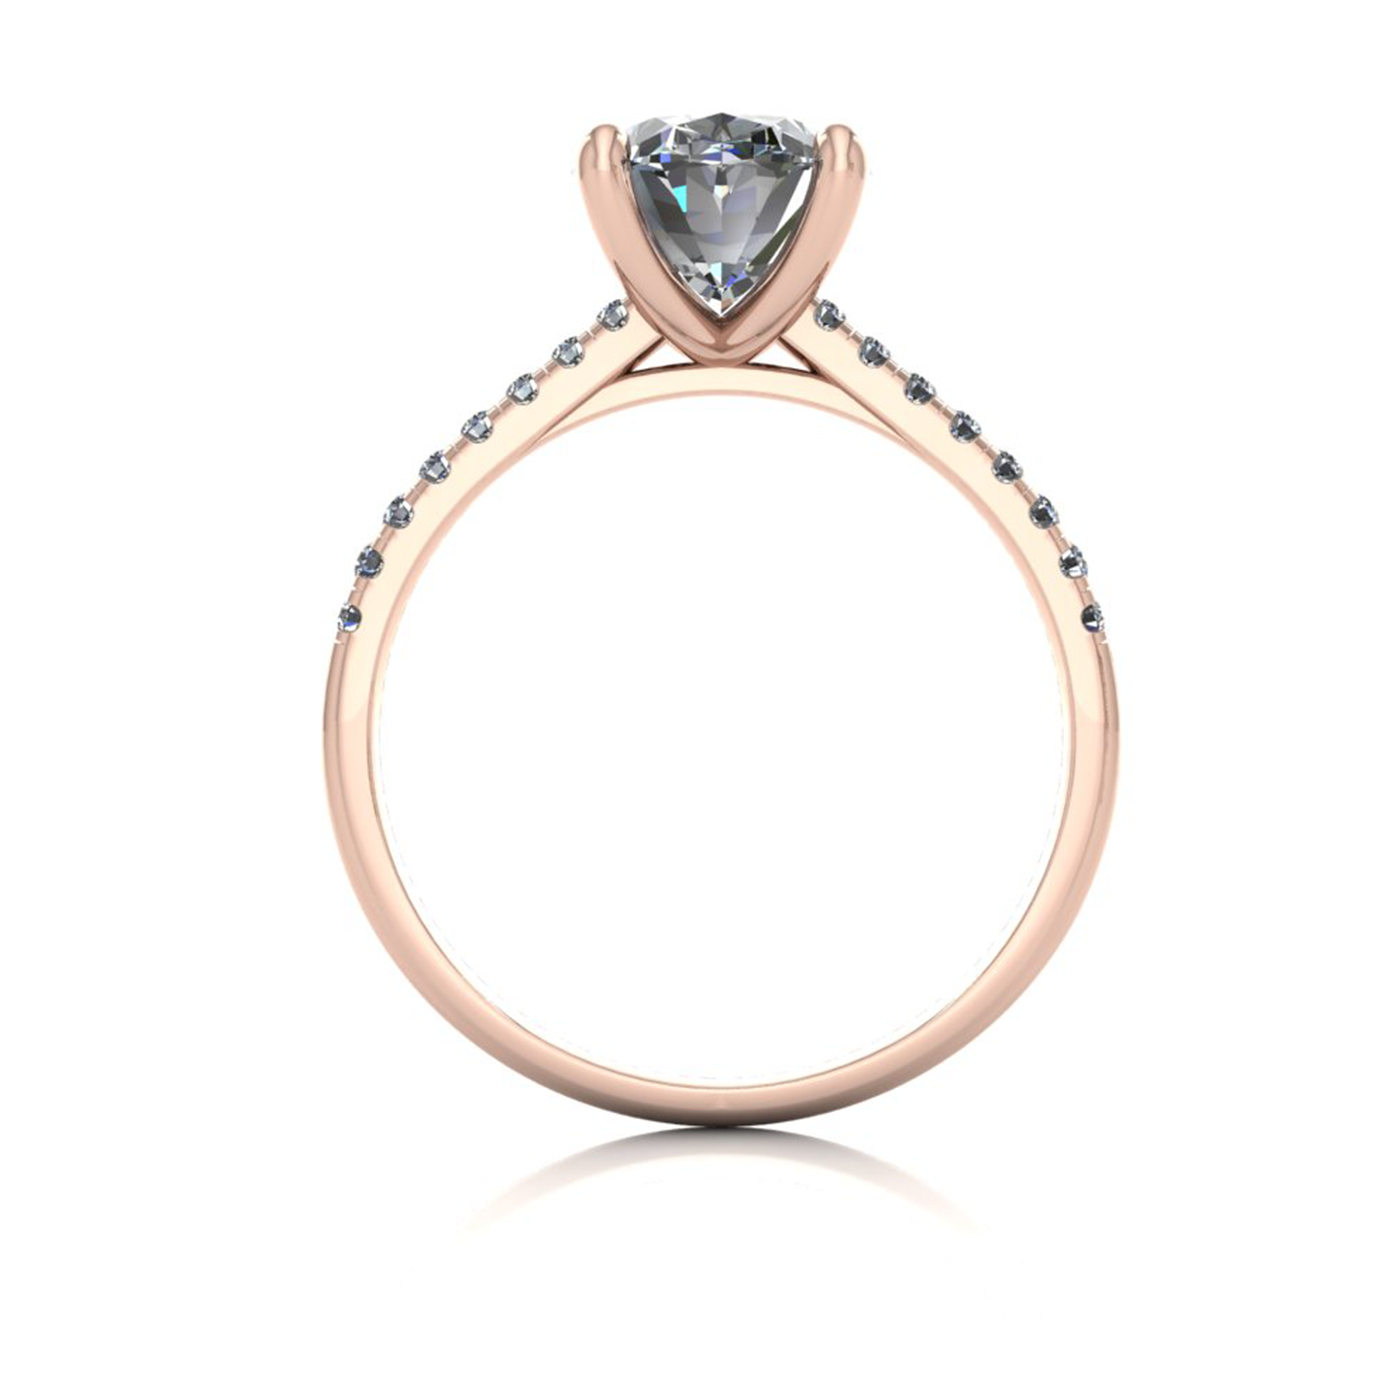 18k rose gold  2,00 ct 4 prongs oval cut diamond engagement ring with whisper thin pavÉ set band Photos & images